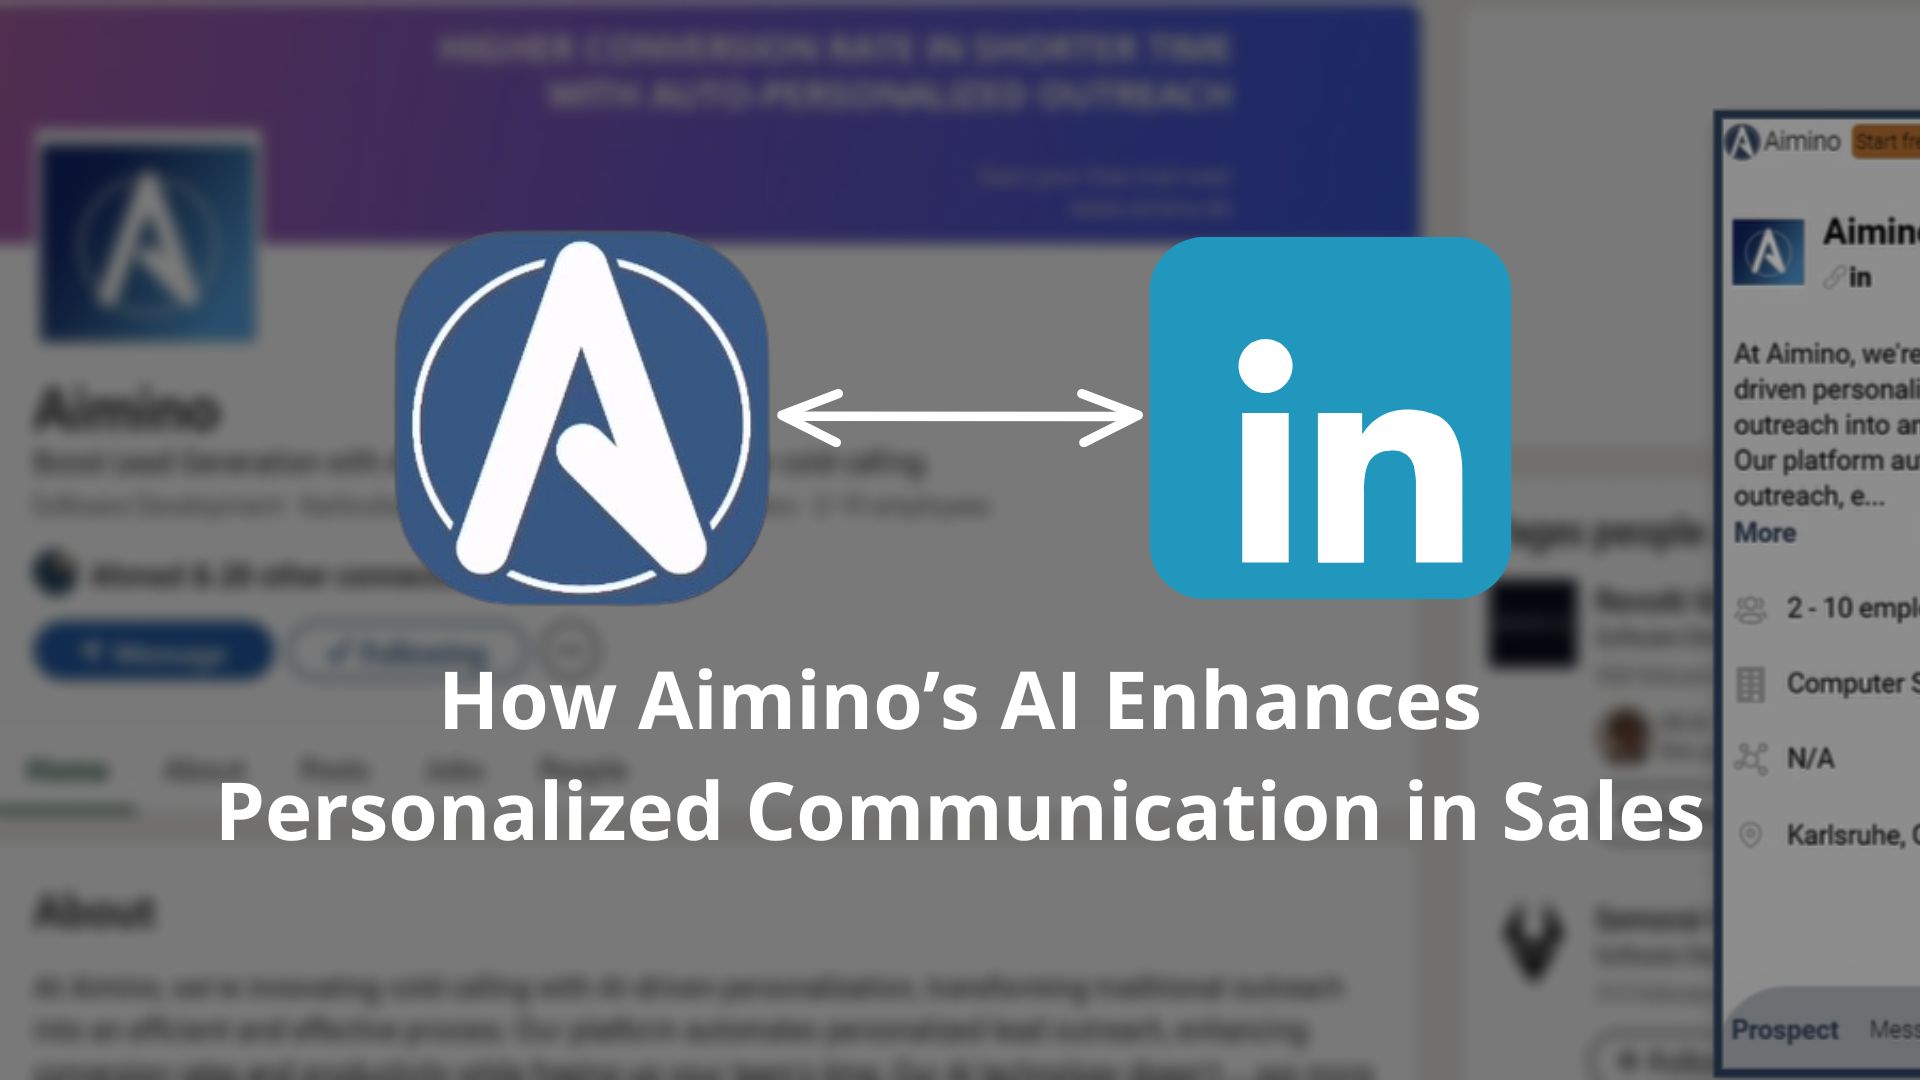 How Aimino’s AI Enhances Personalized Communication in Sales